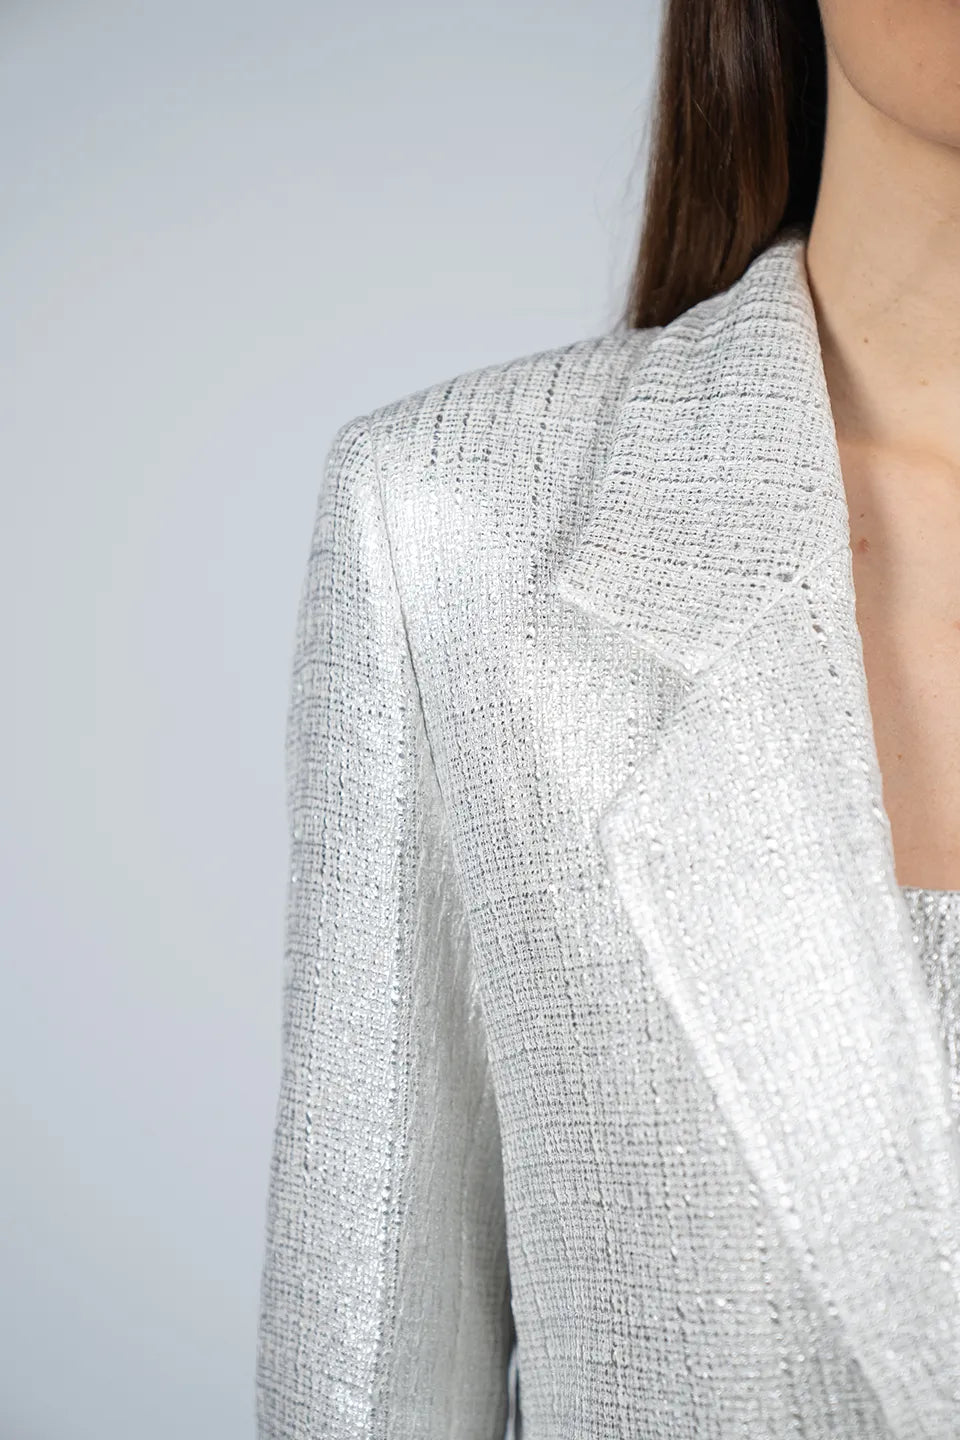 Designer Silver Women blazers, Jacket, shop online with free delivery in UAE. Product gallery 6